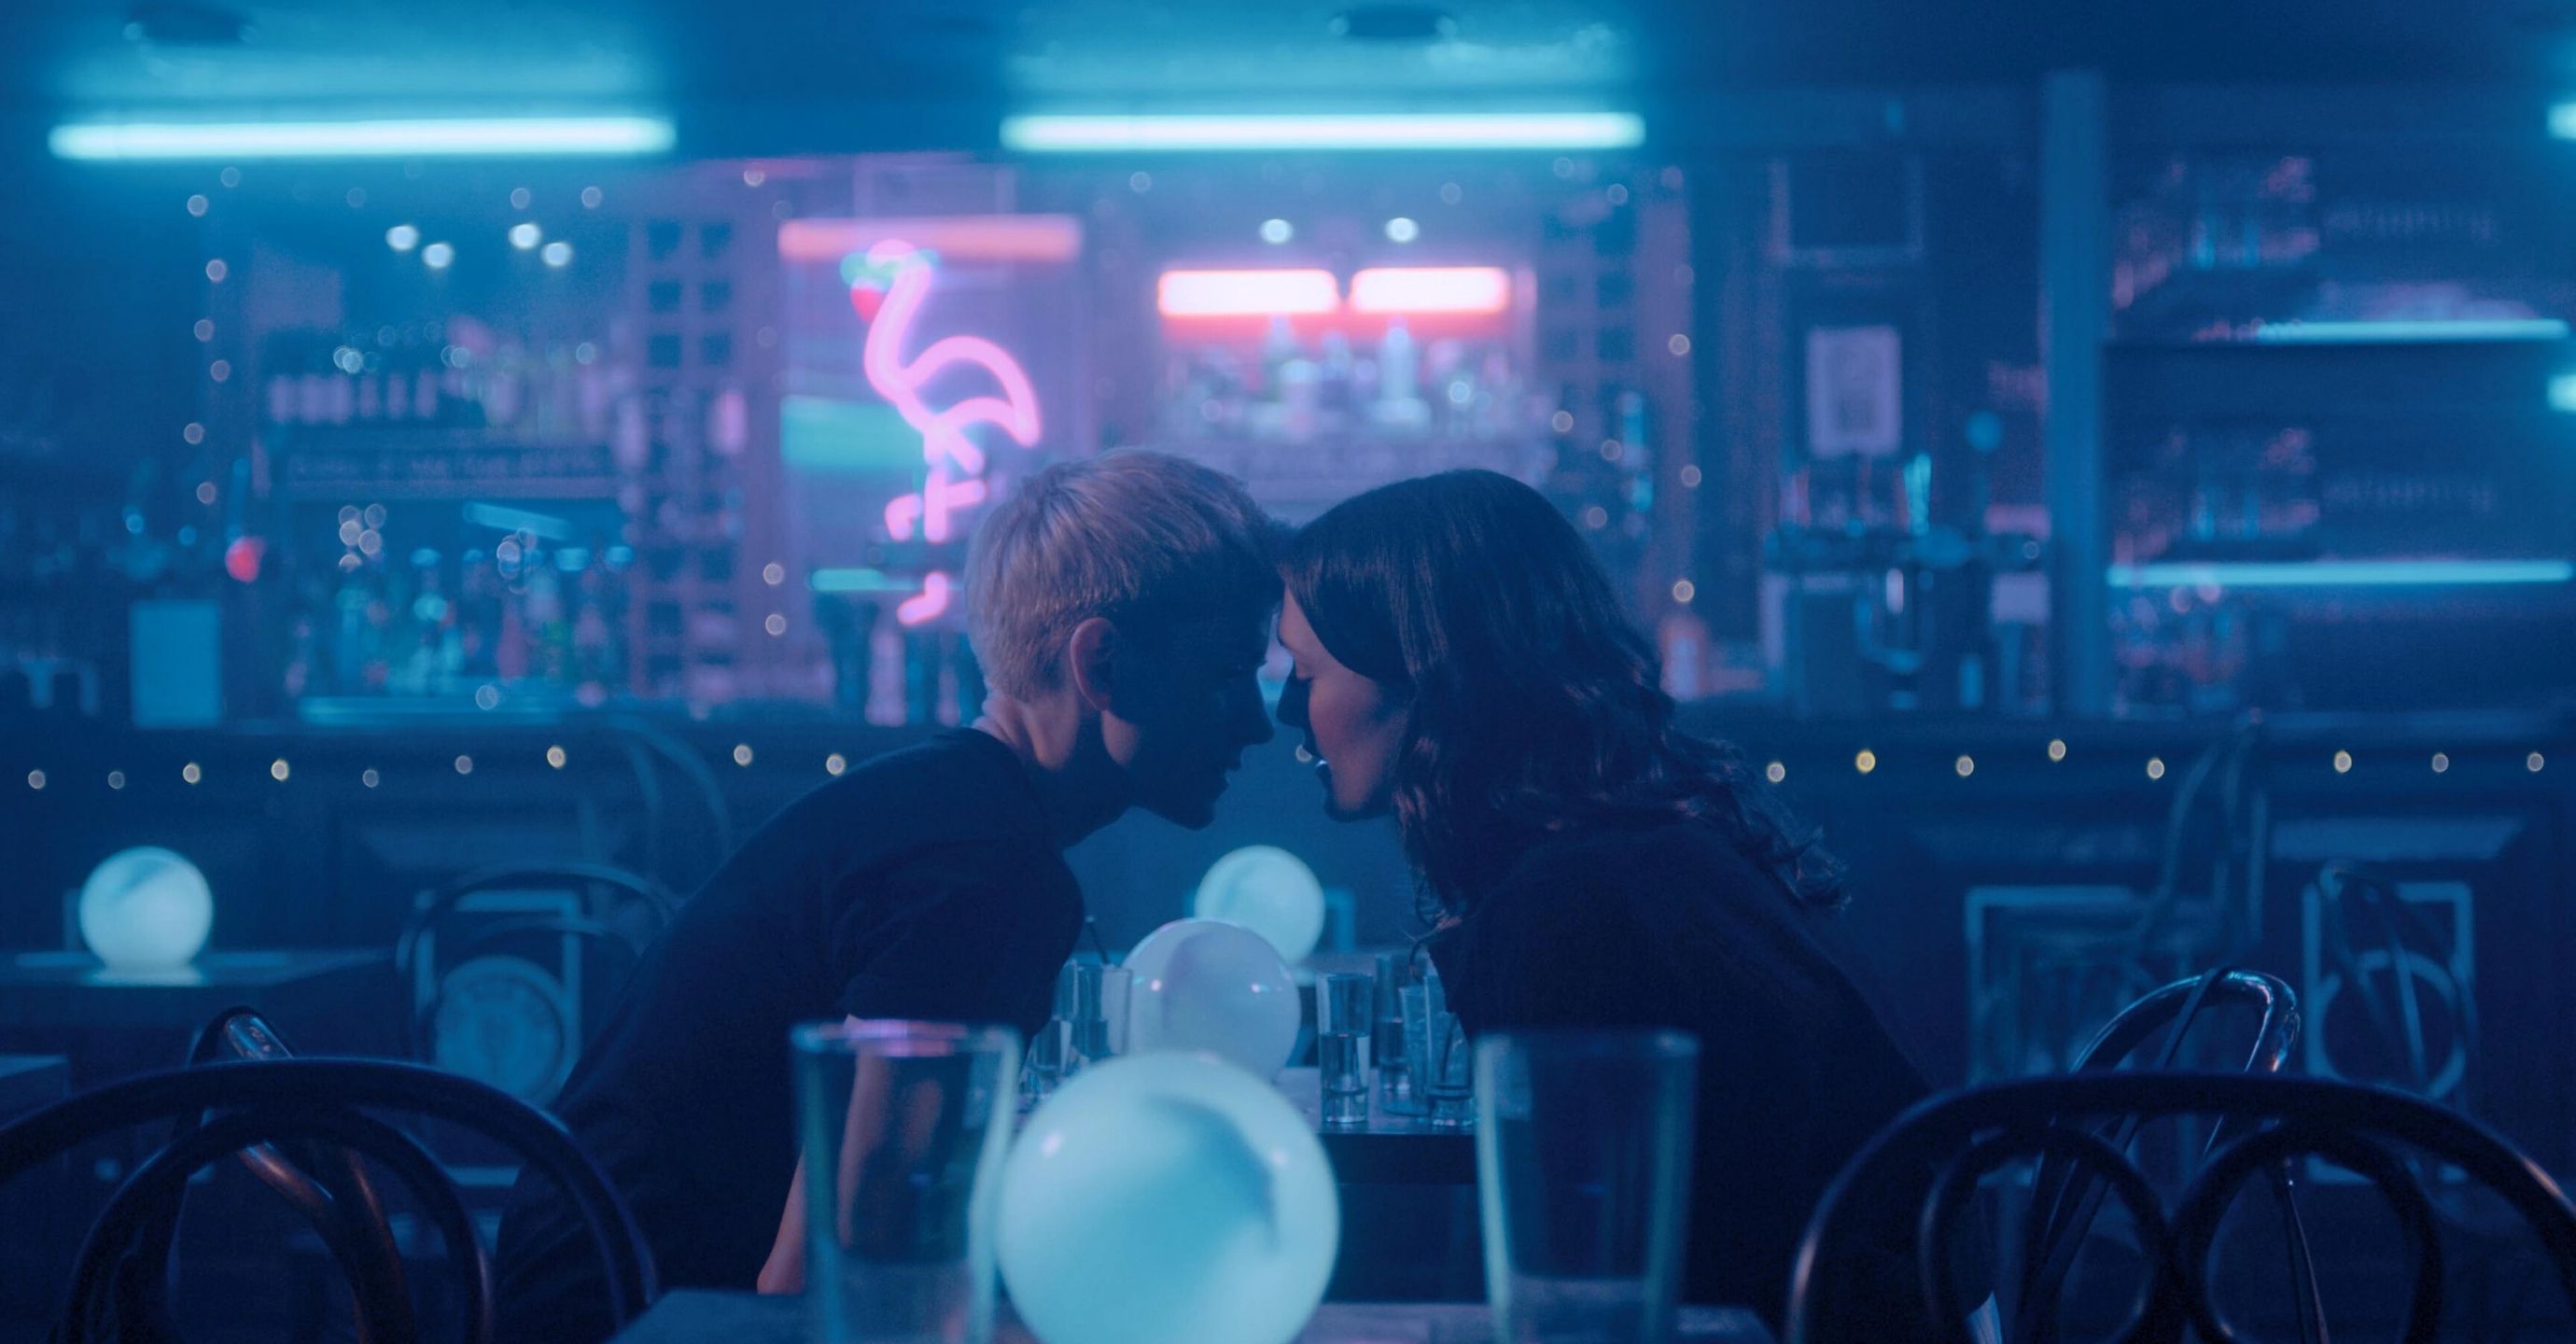 Two woman sit in an empty bar leaning in before a kiss